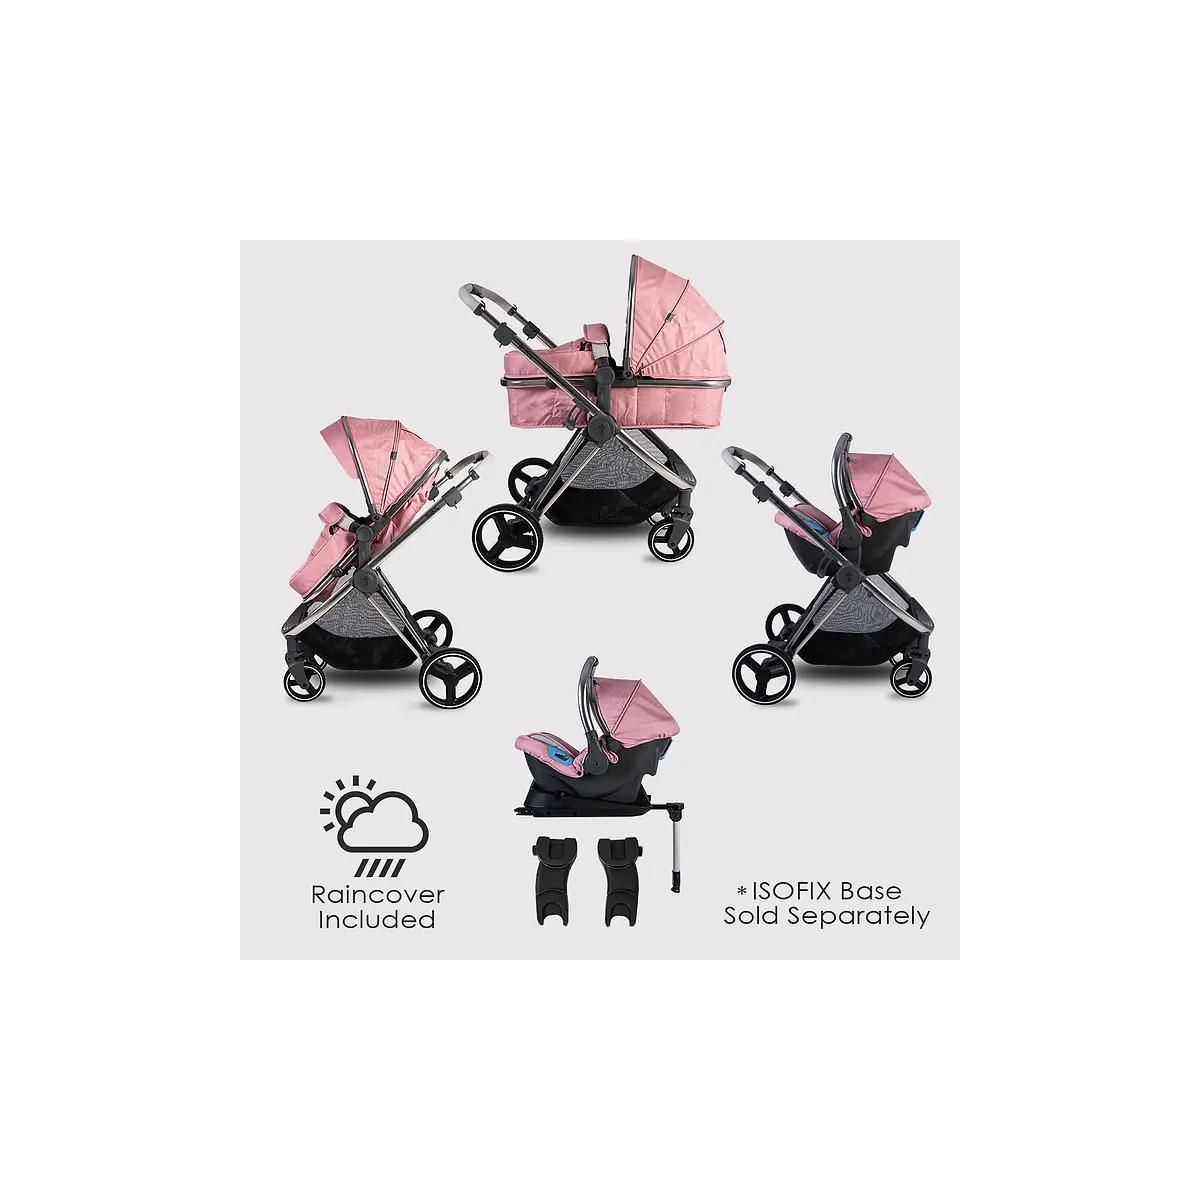 Red Kite Push Me Pace Isofix Base from